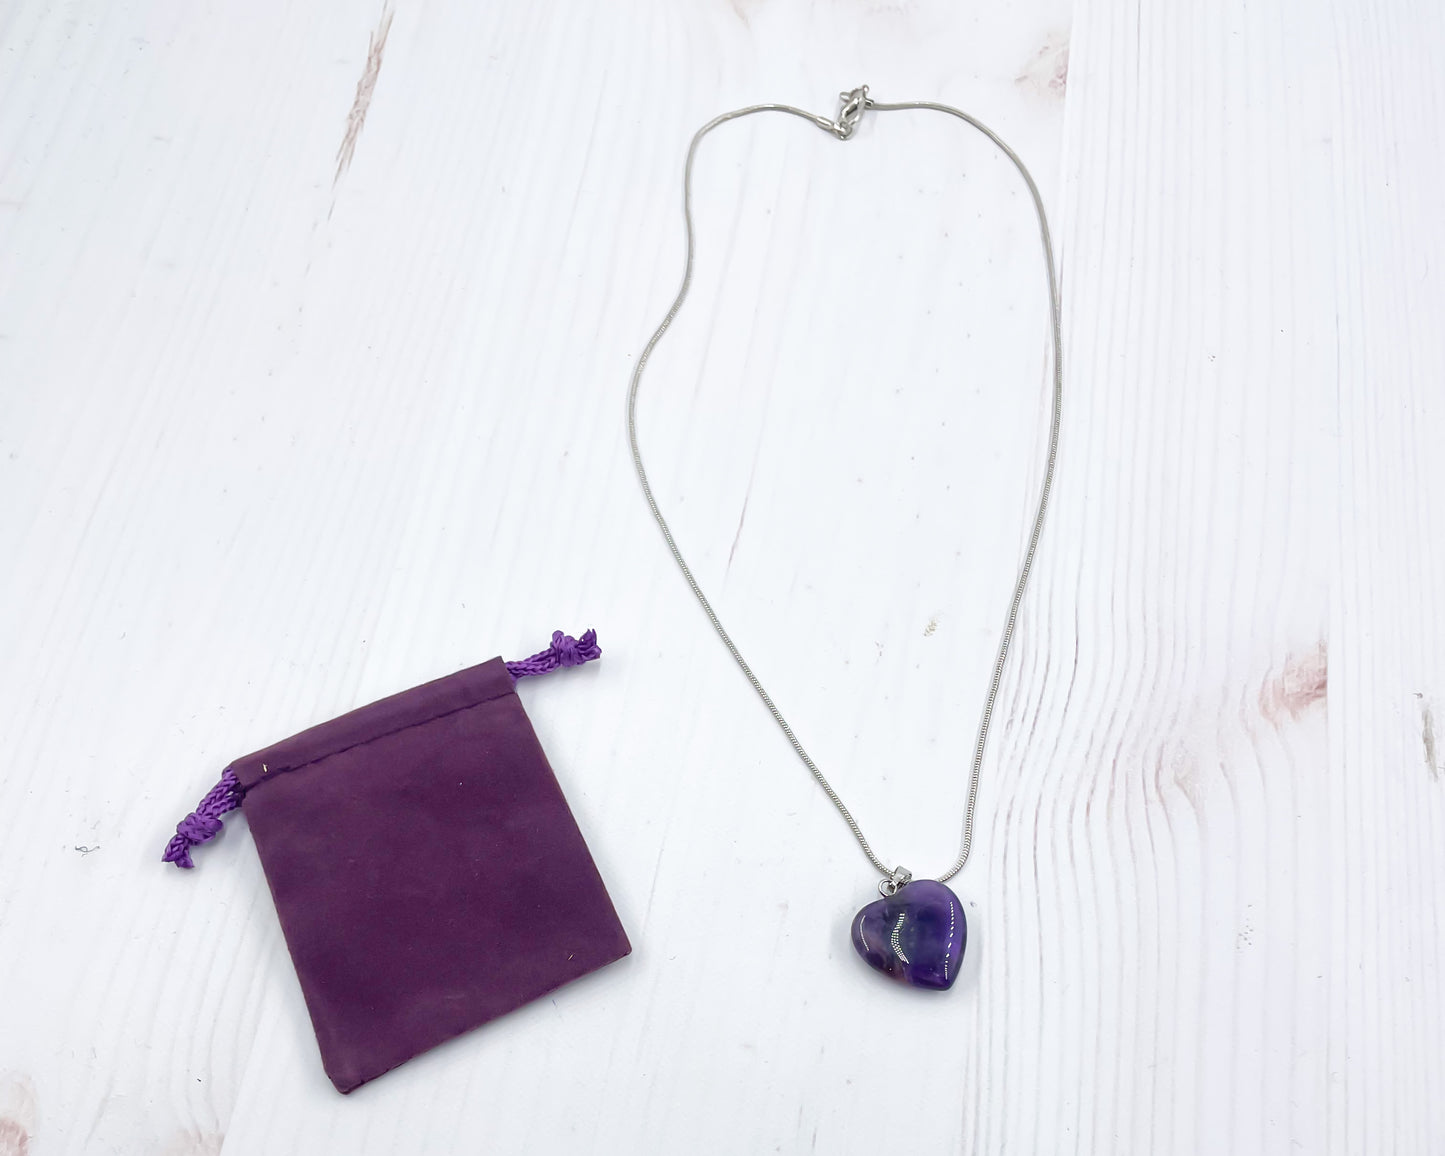 Amethyst Heart Shaped Pendant Necklace